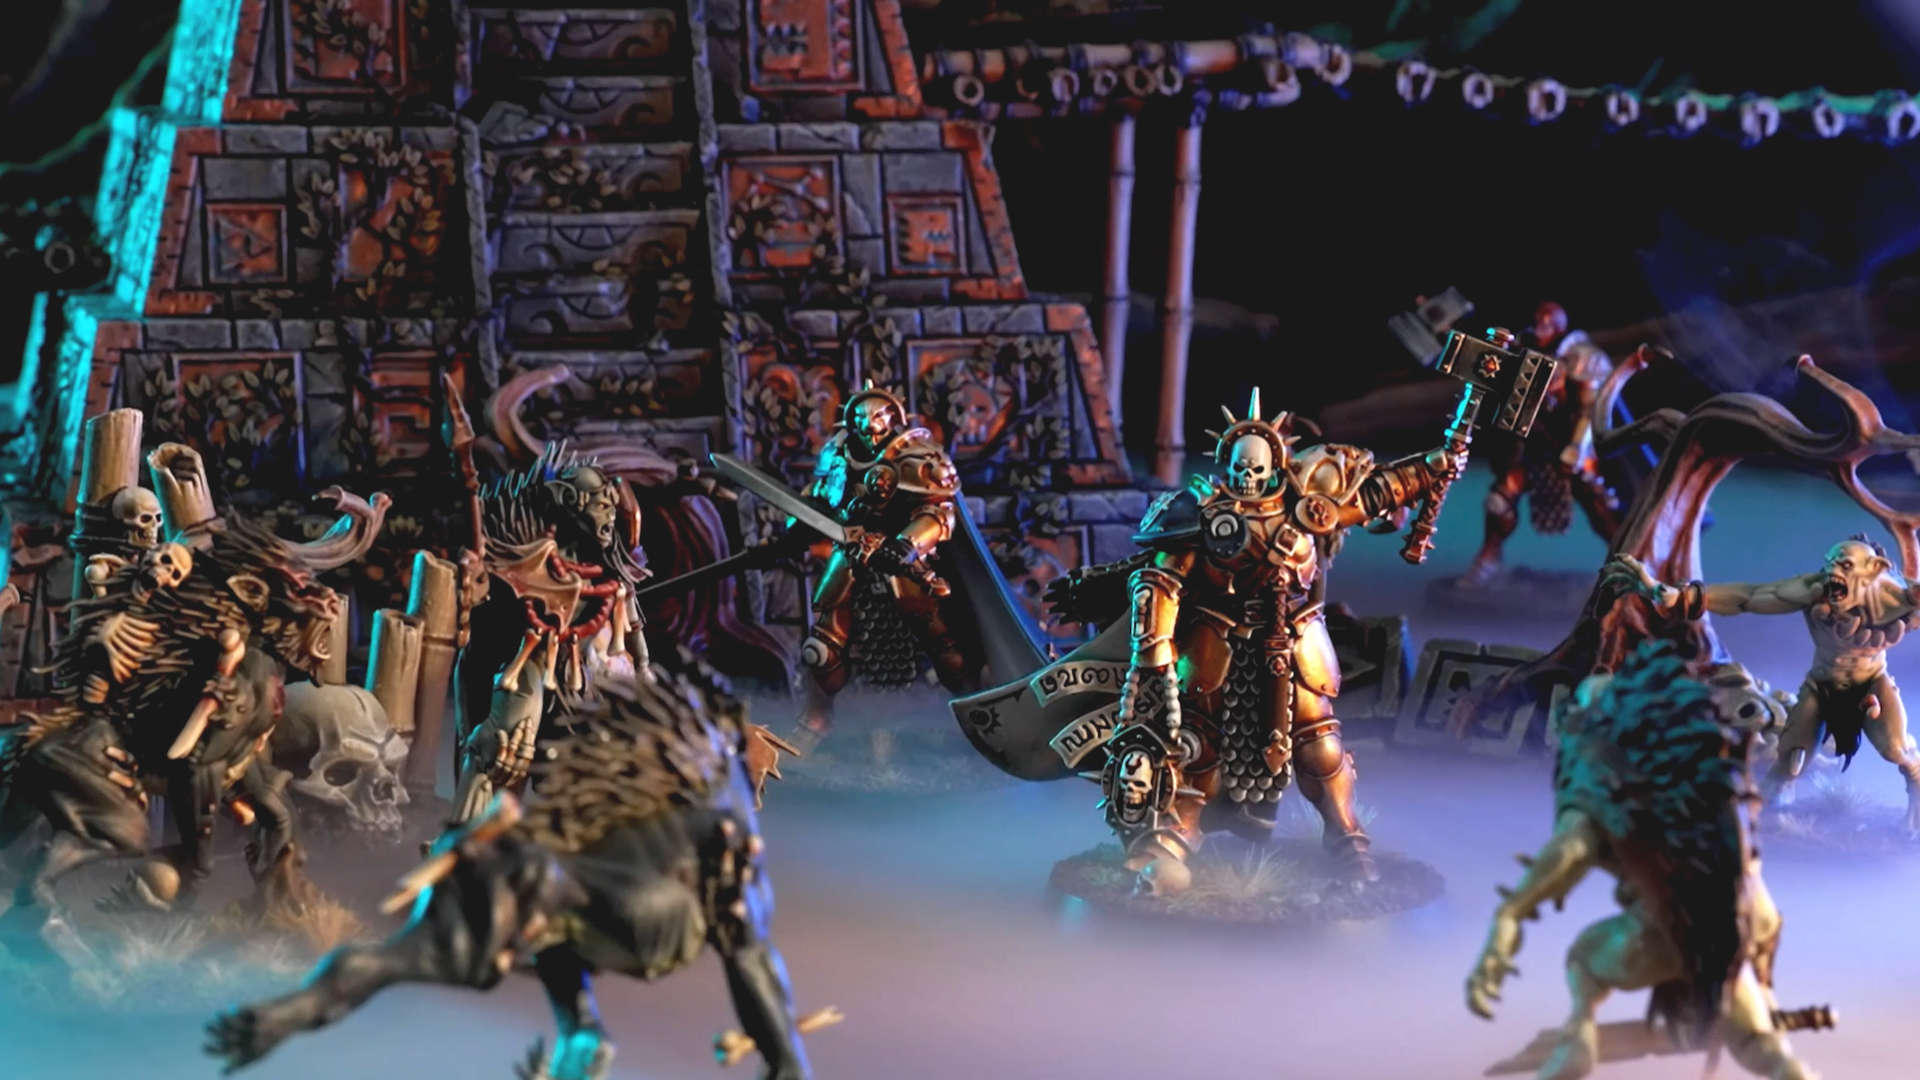 There’s a whole pyramid in the next Warhammer Warcry box set